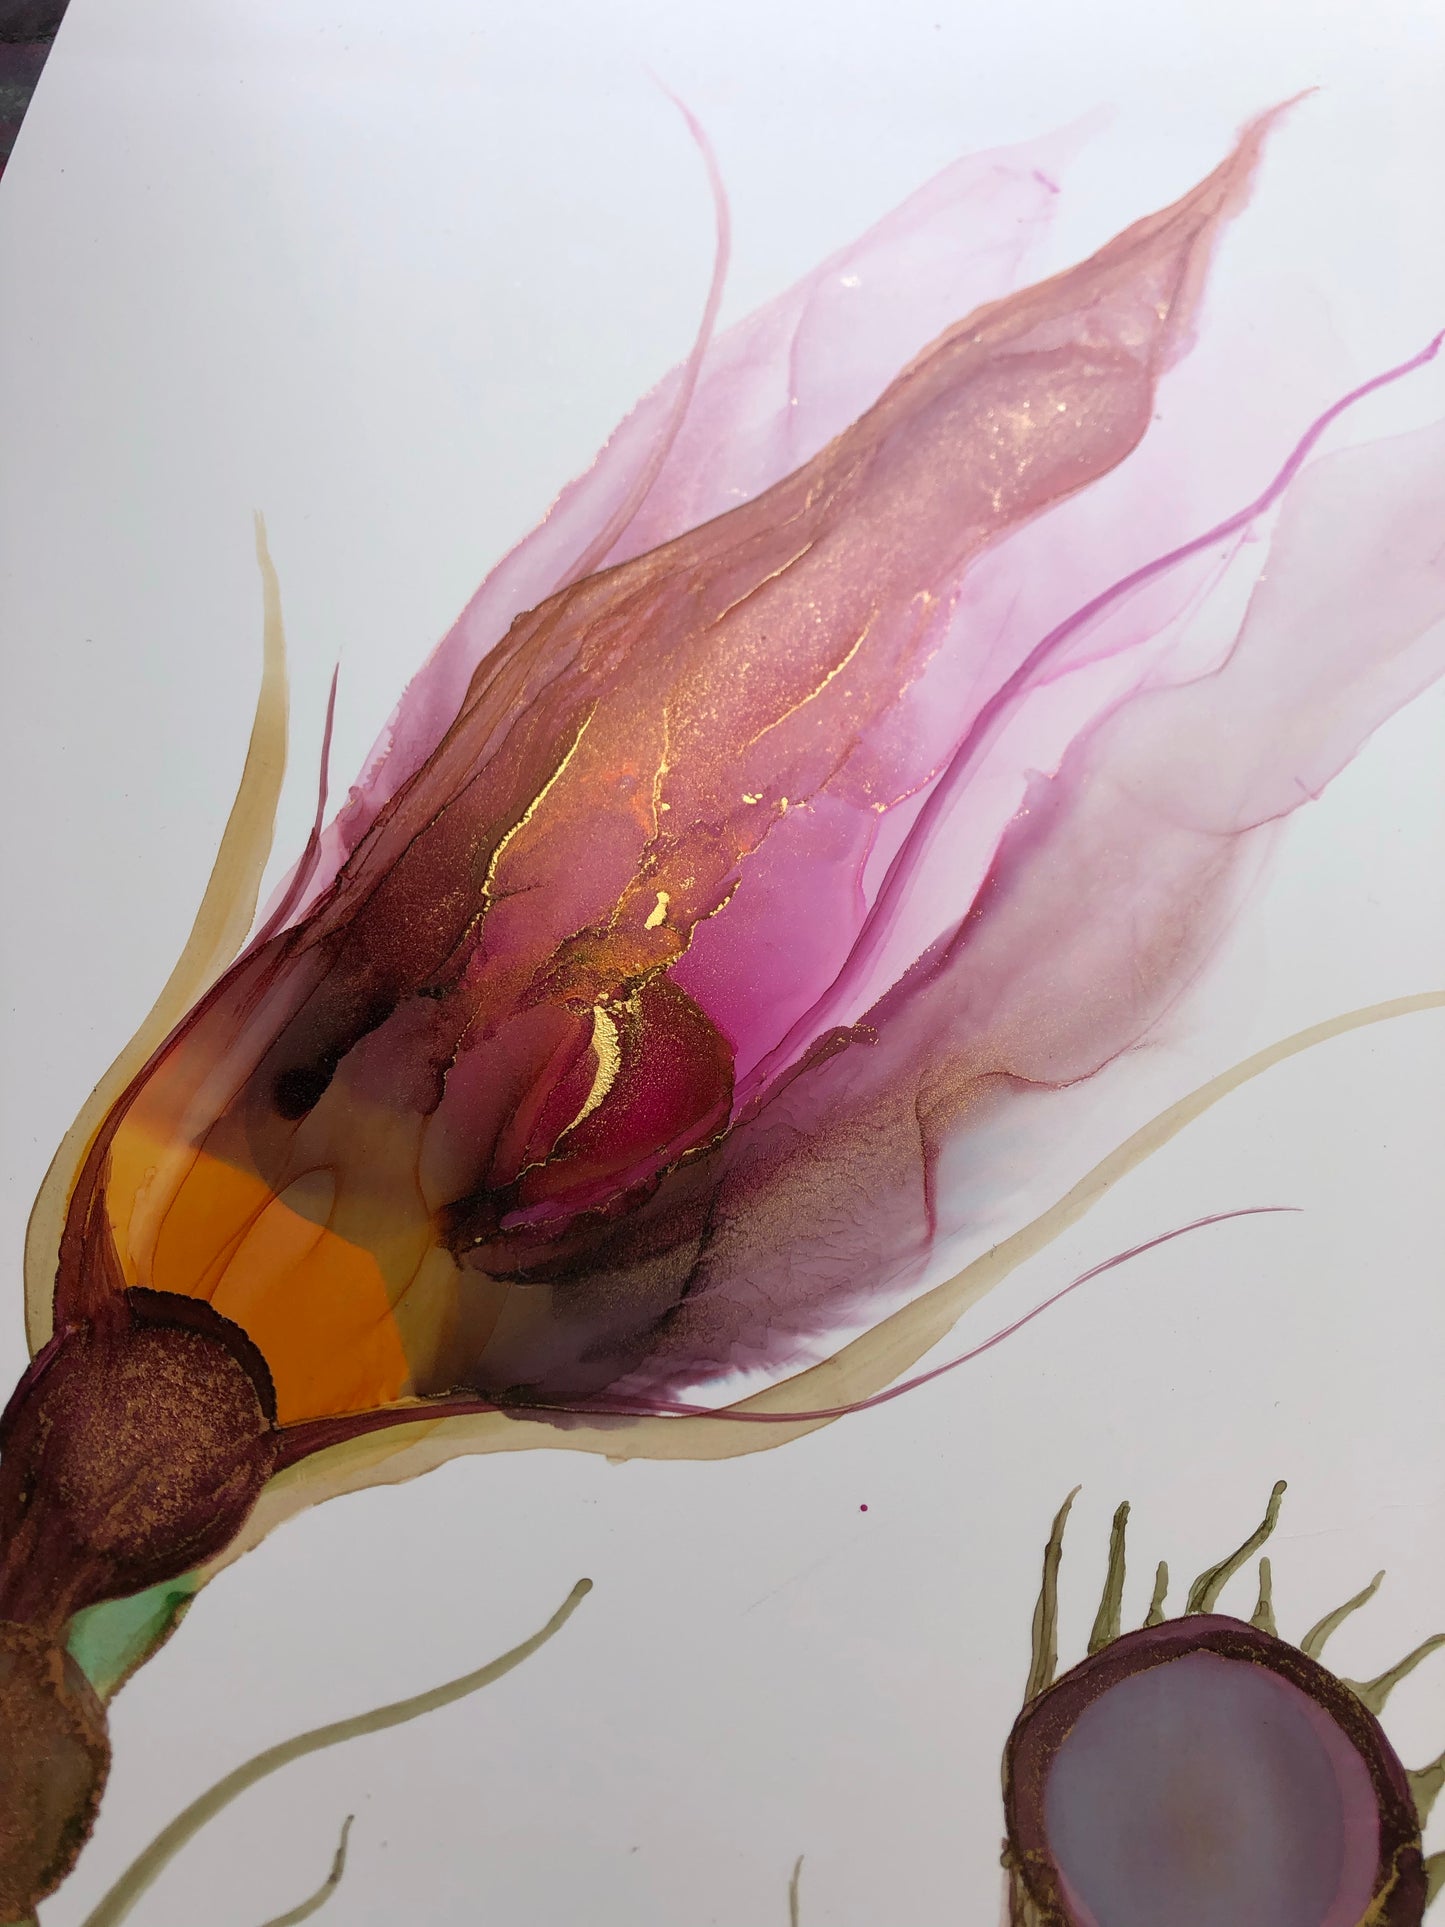 Floral abstract alcohol ink painting ‘Little Quirks I’ - Aesthetic Alchemy Art